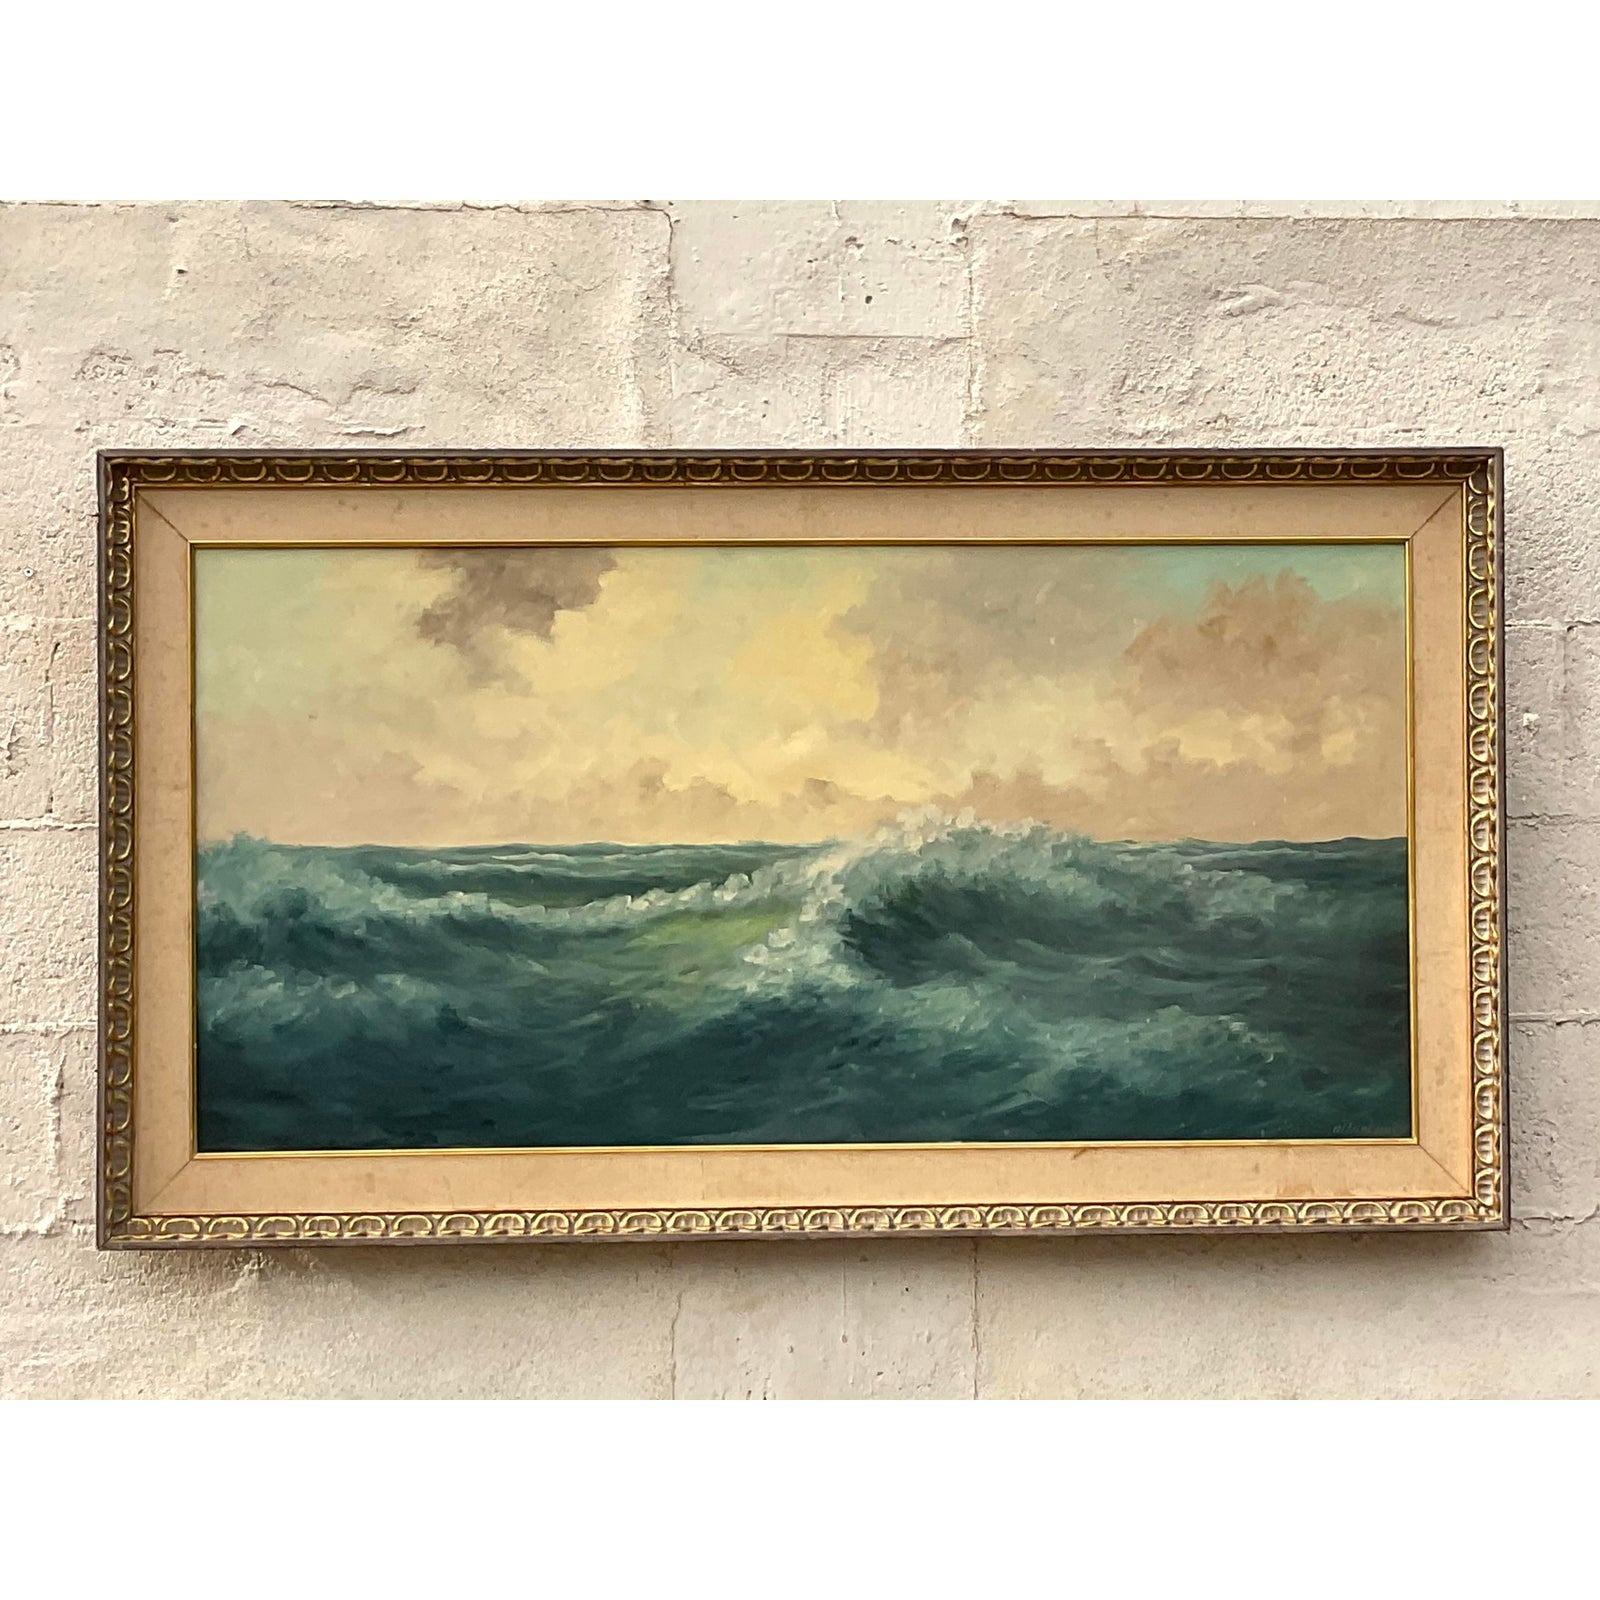 A fabulous vintage Coastal original oil painting. A striking composition of crashing waves. High energy, yet soothing at the same time. A beautiful patina from time. Acquired from a Palm Beach estate.